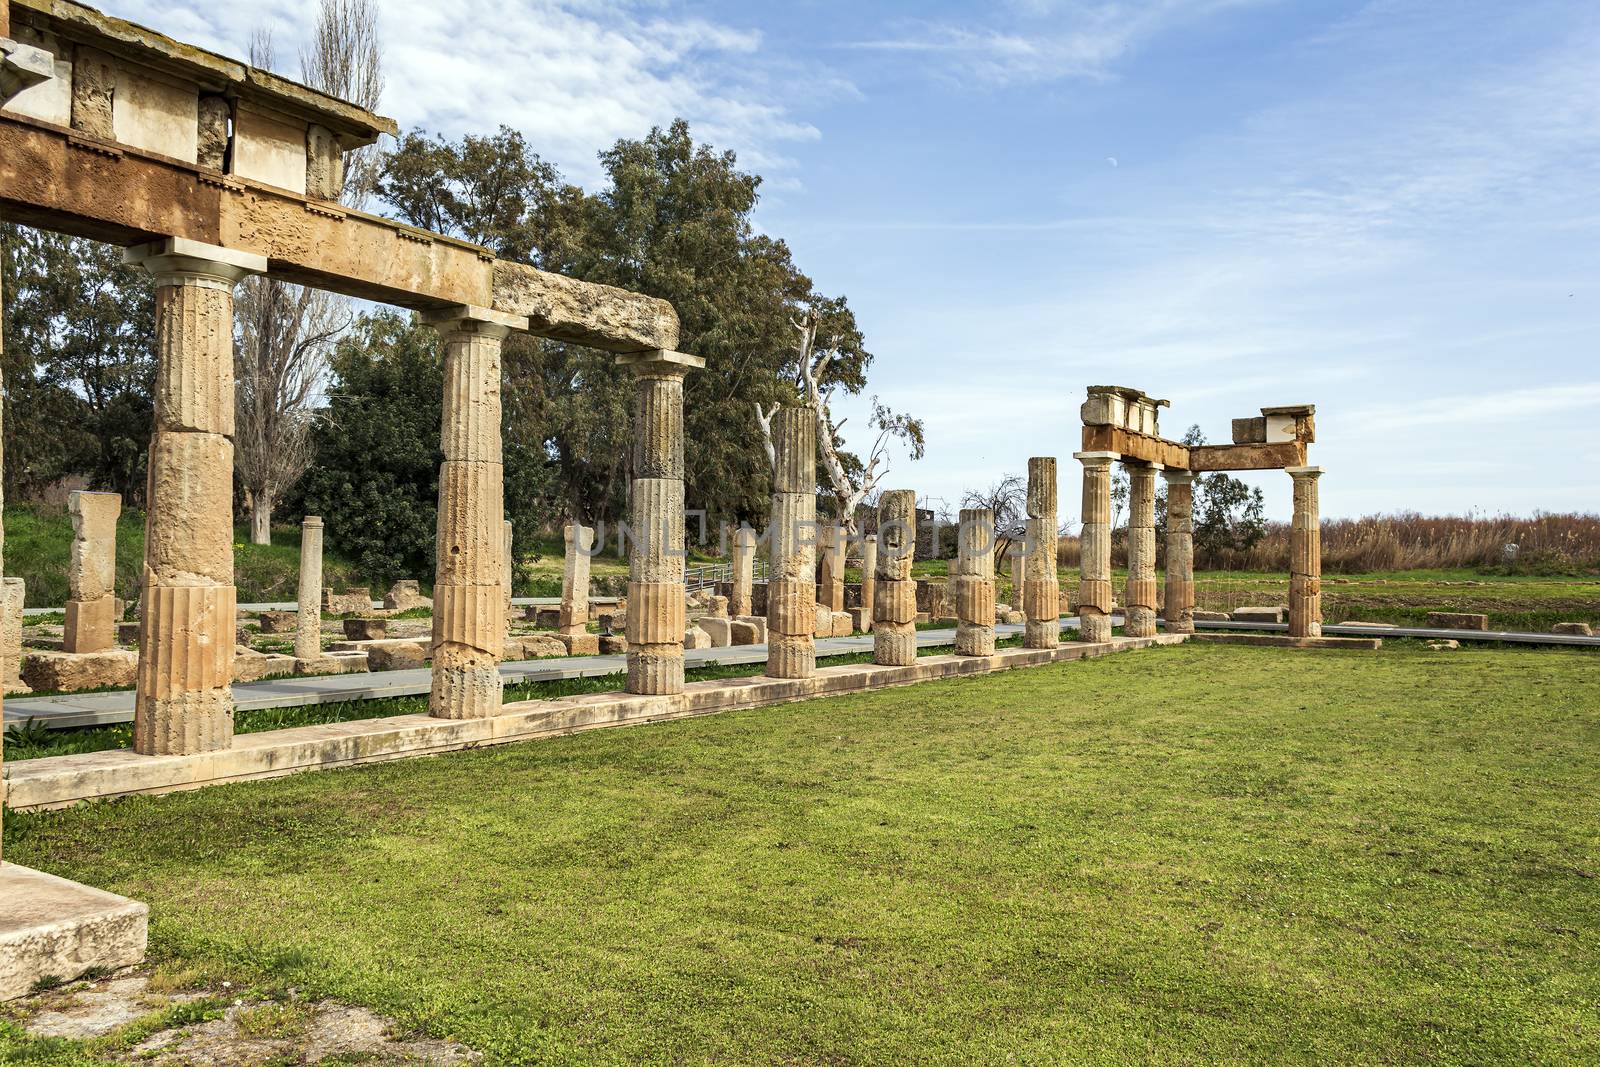 Temple of Artemis in archaeological site of Brauron, Attica, Greece by ankarb